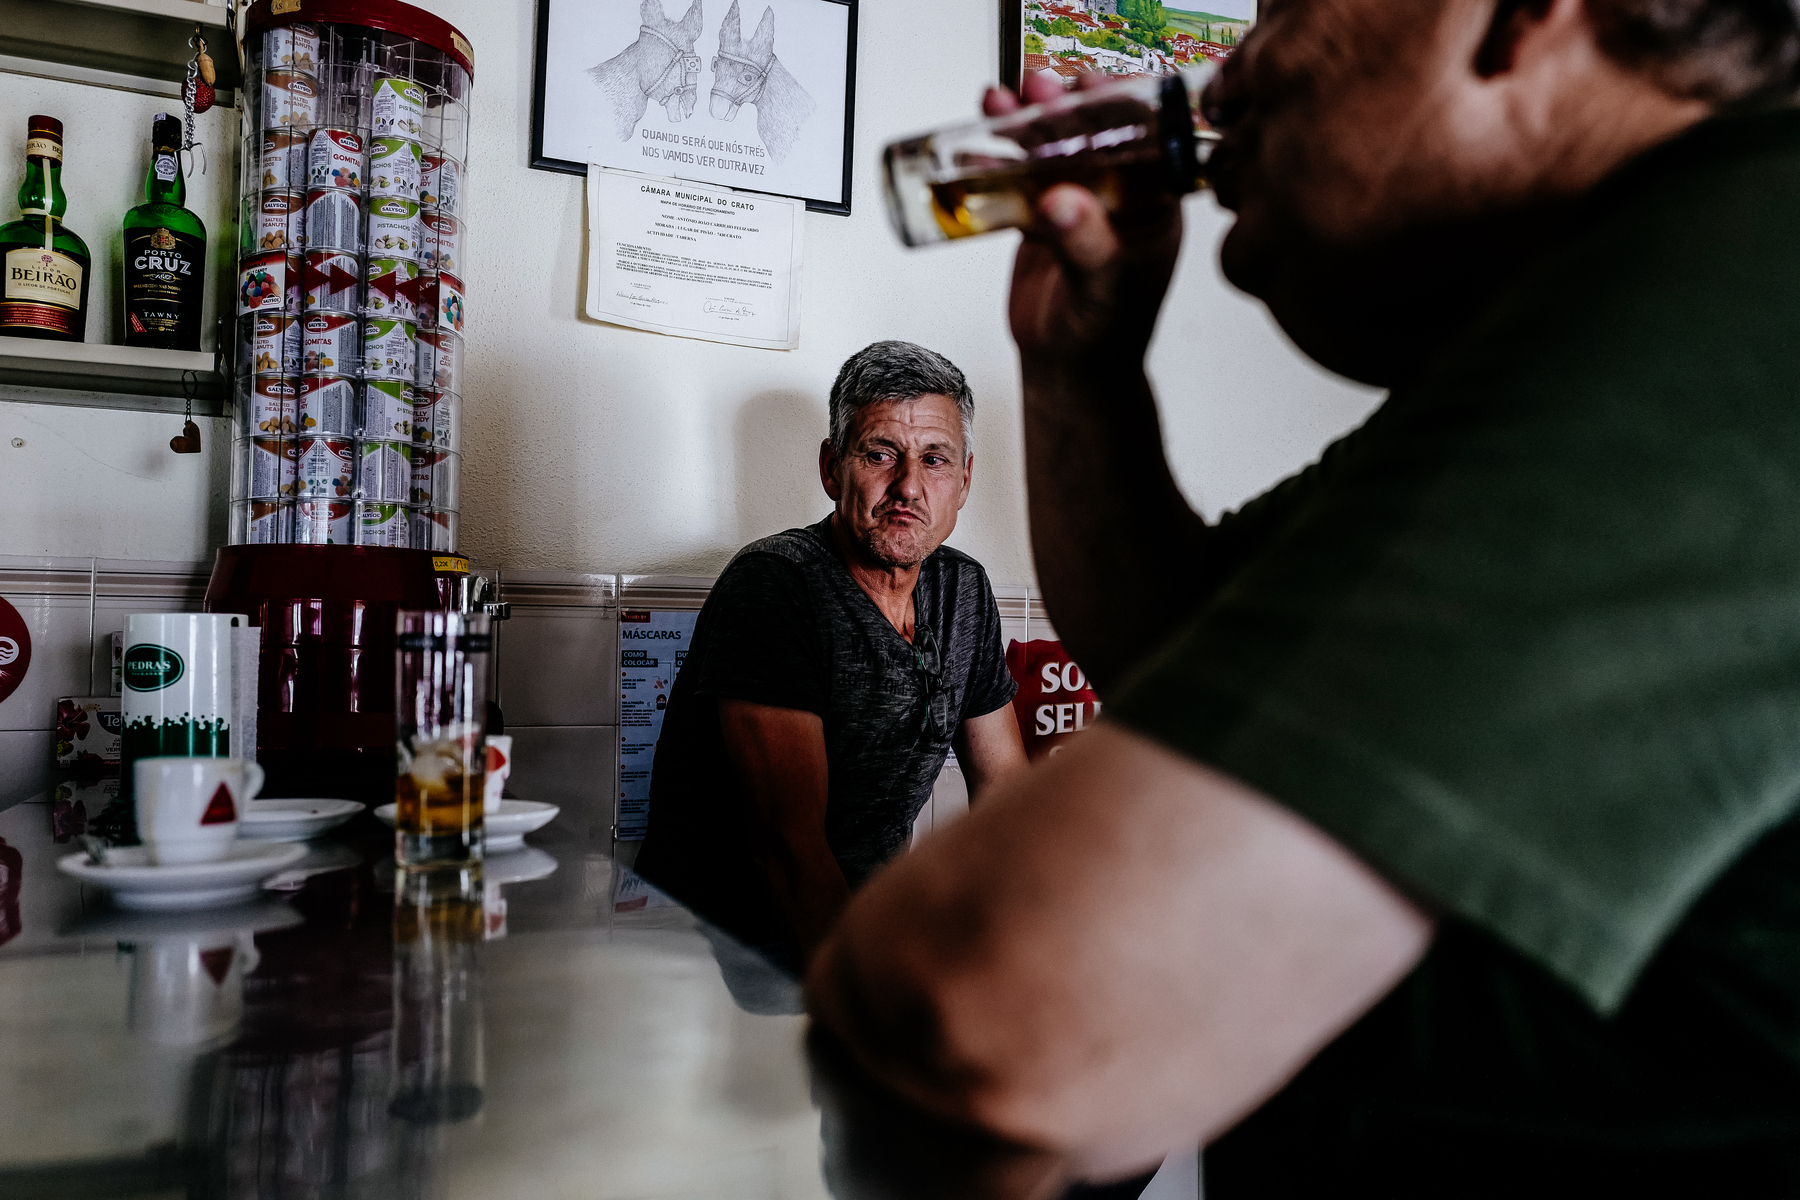 A man has a drink while sitting at the counter, another looks at something outside the frame. 